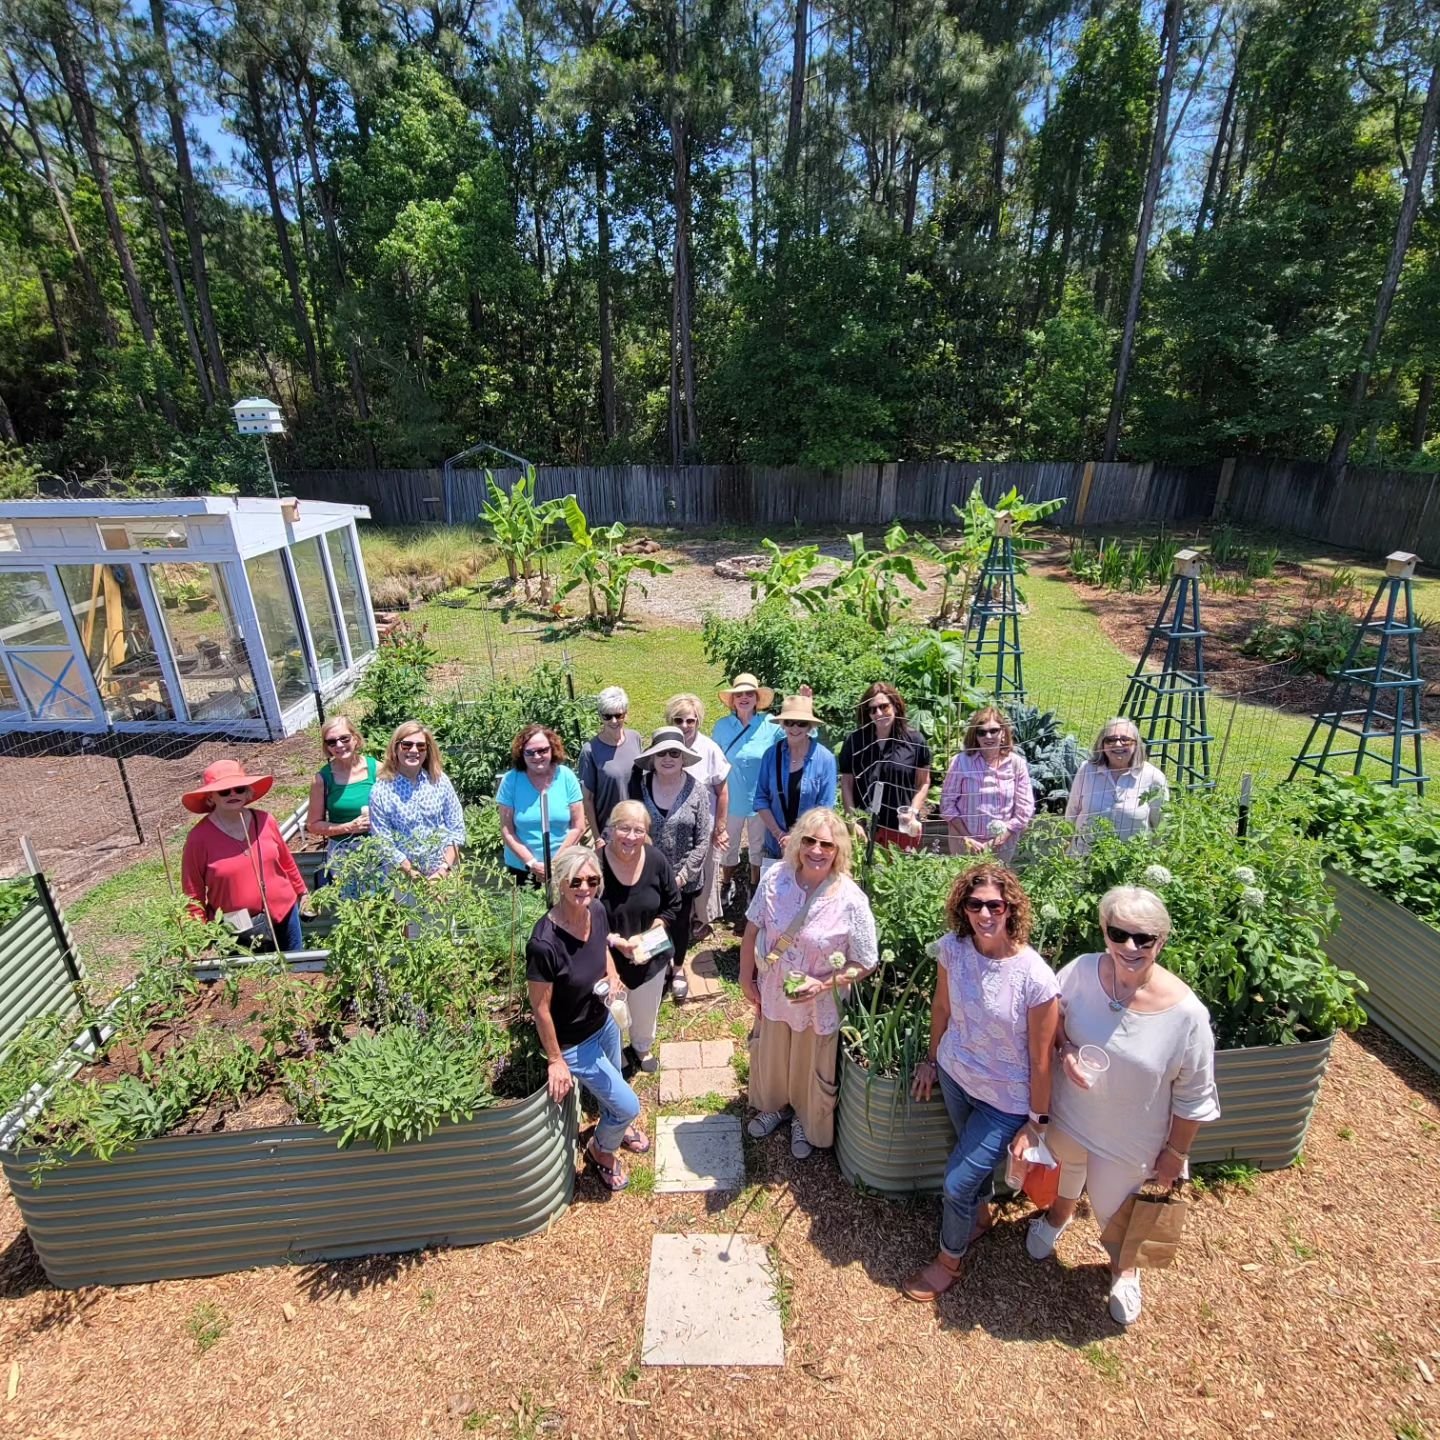 We had such a great time hosting the Driftwood Garden Club for a tour! Thank you so much for coming by to talk, walk, and learn about what we're doing right in our backyard.

#coastalhomesteads 
#driftwoodgardenclub
#gardensofinstagram
#gramyourgarde